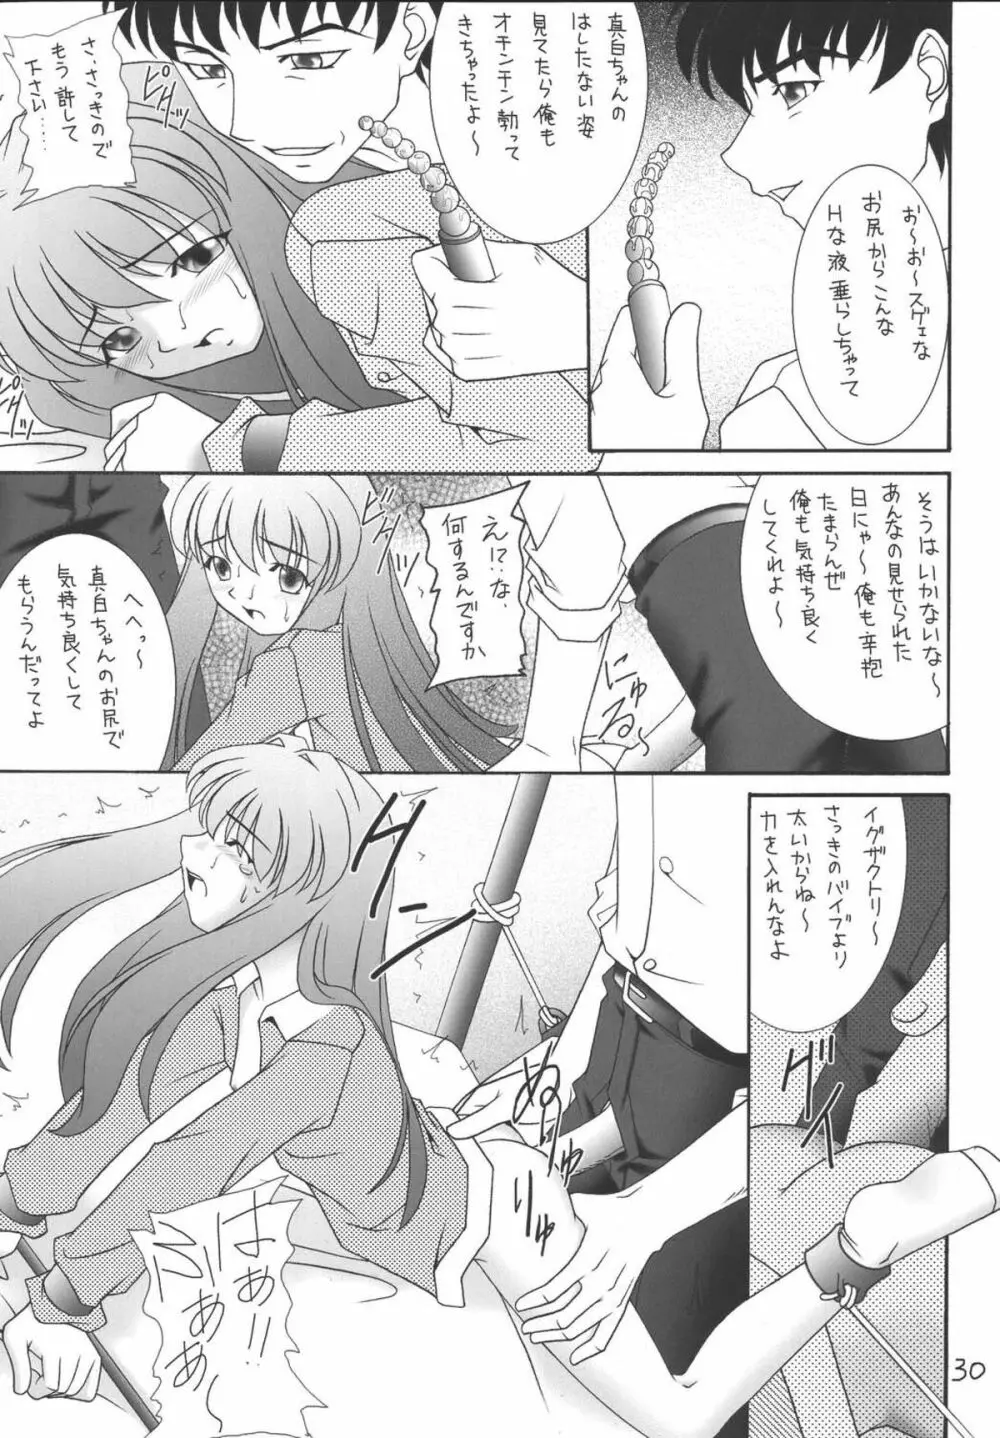 My姫 -vol.2- - page30